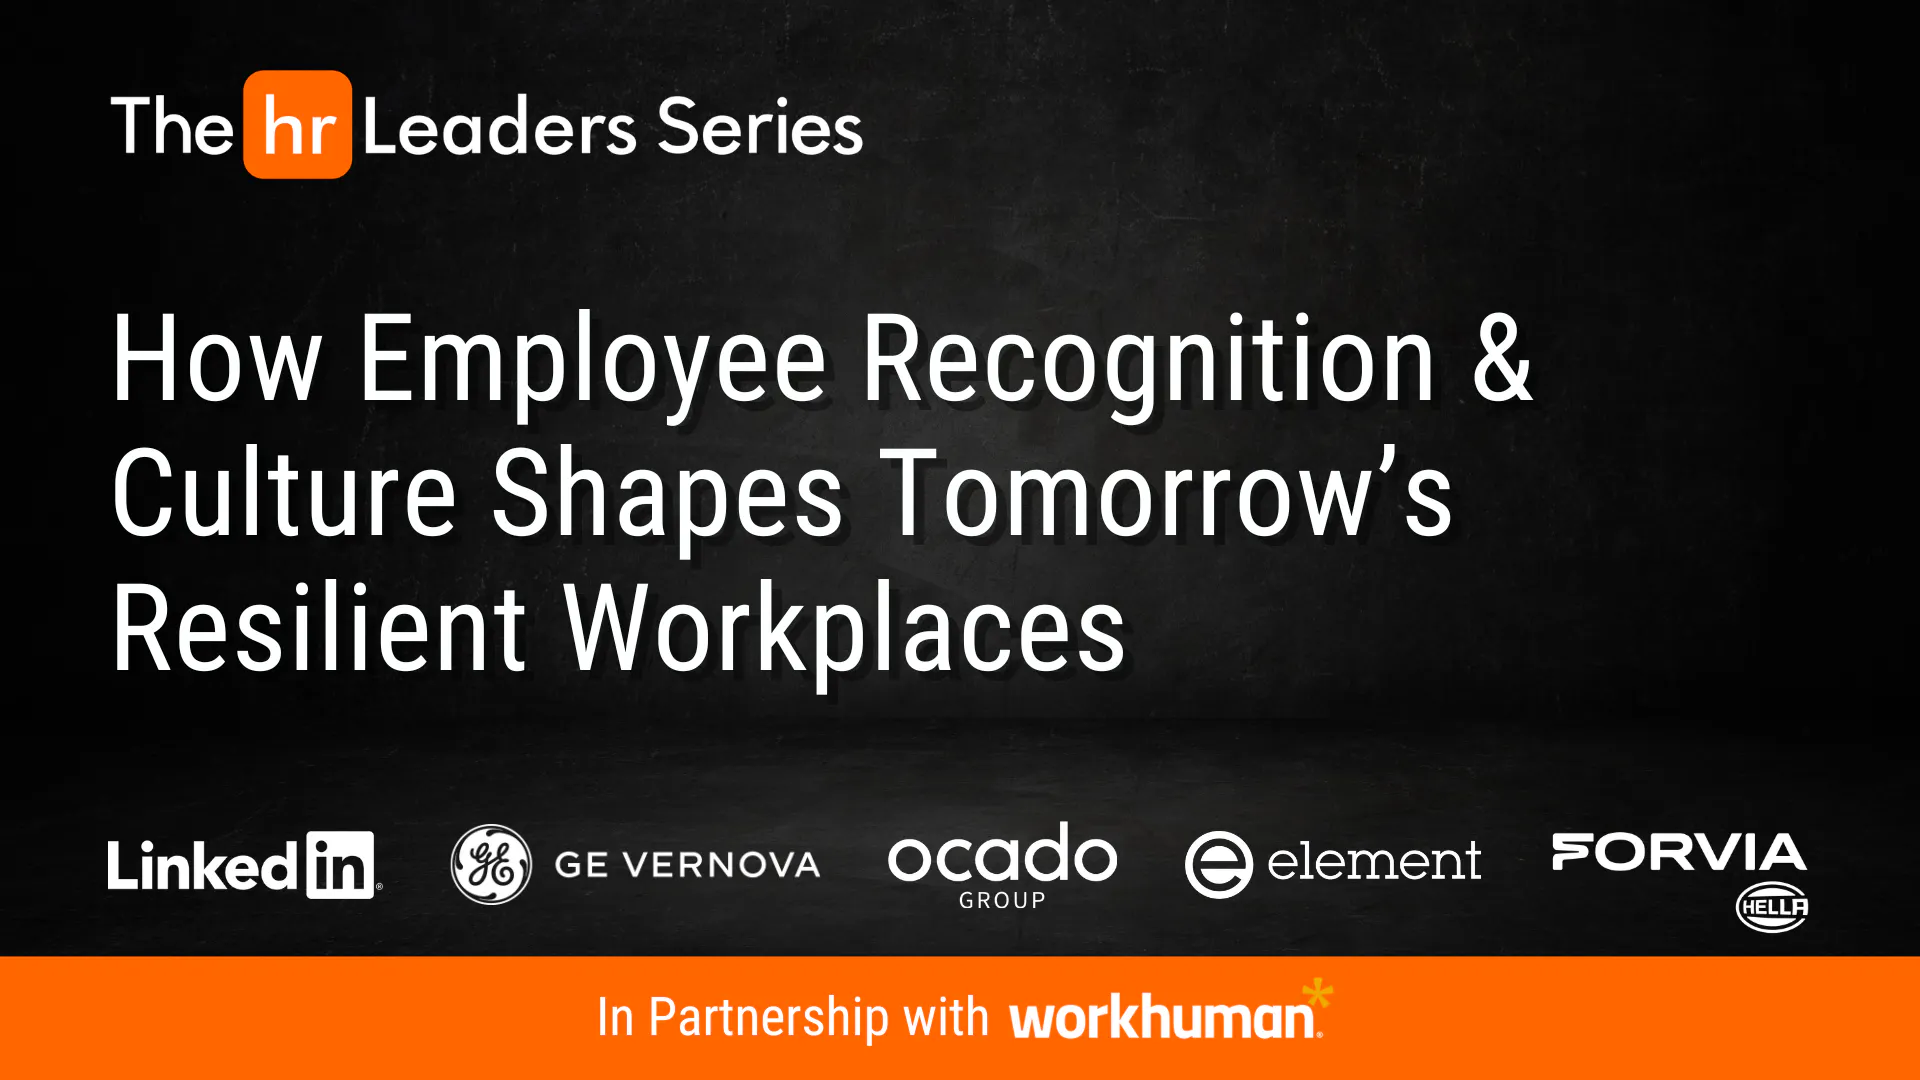 How Employee Recognition & Culture Shapes Tomorrow’s Resilient Workplaces event cover photo